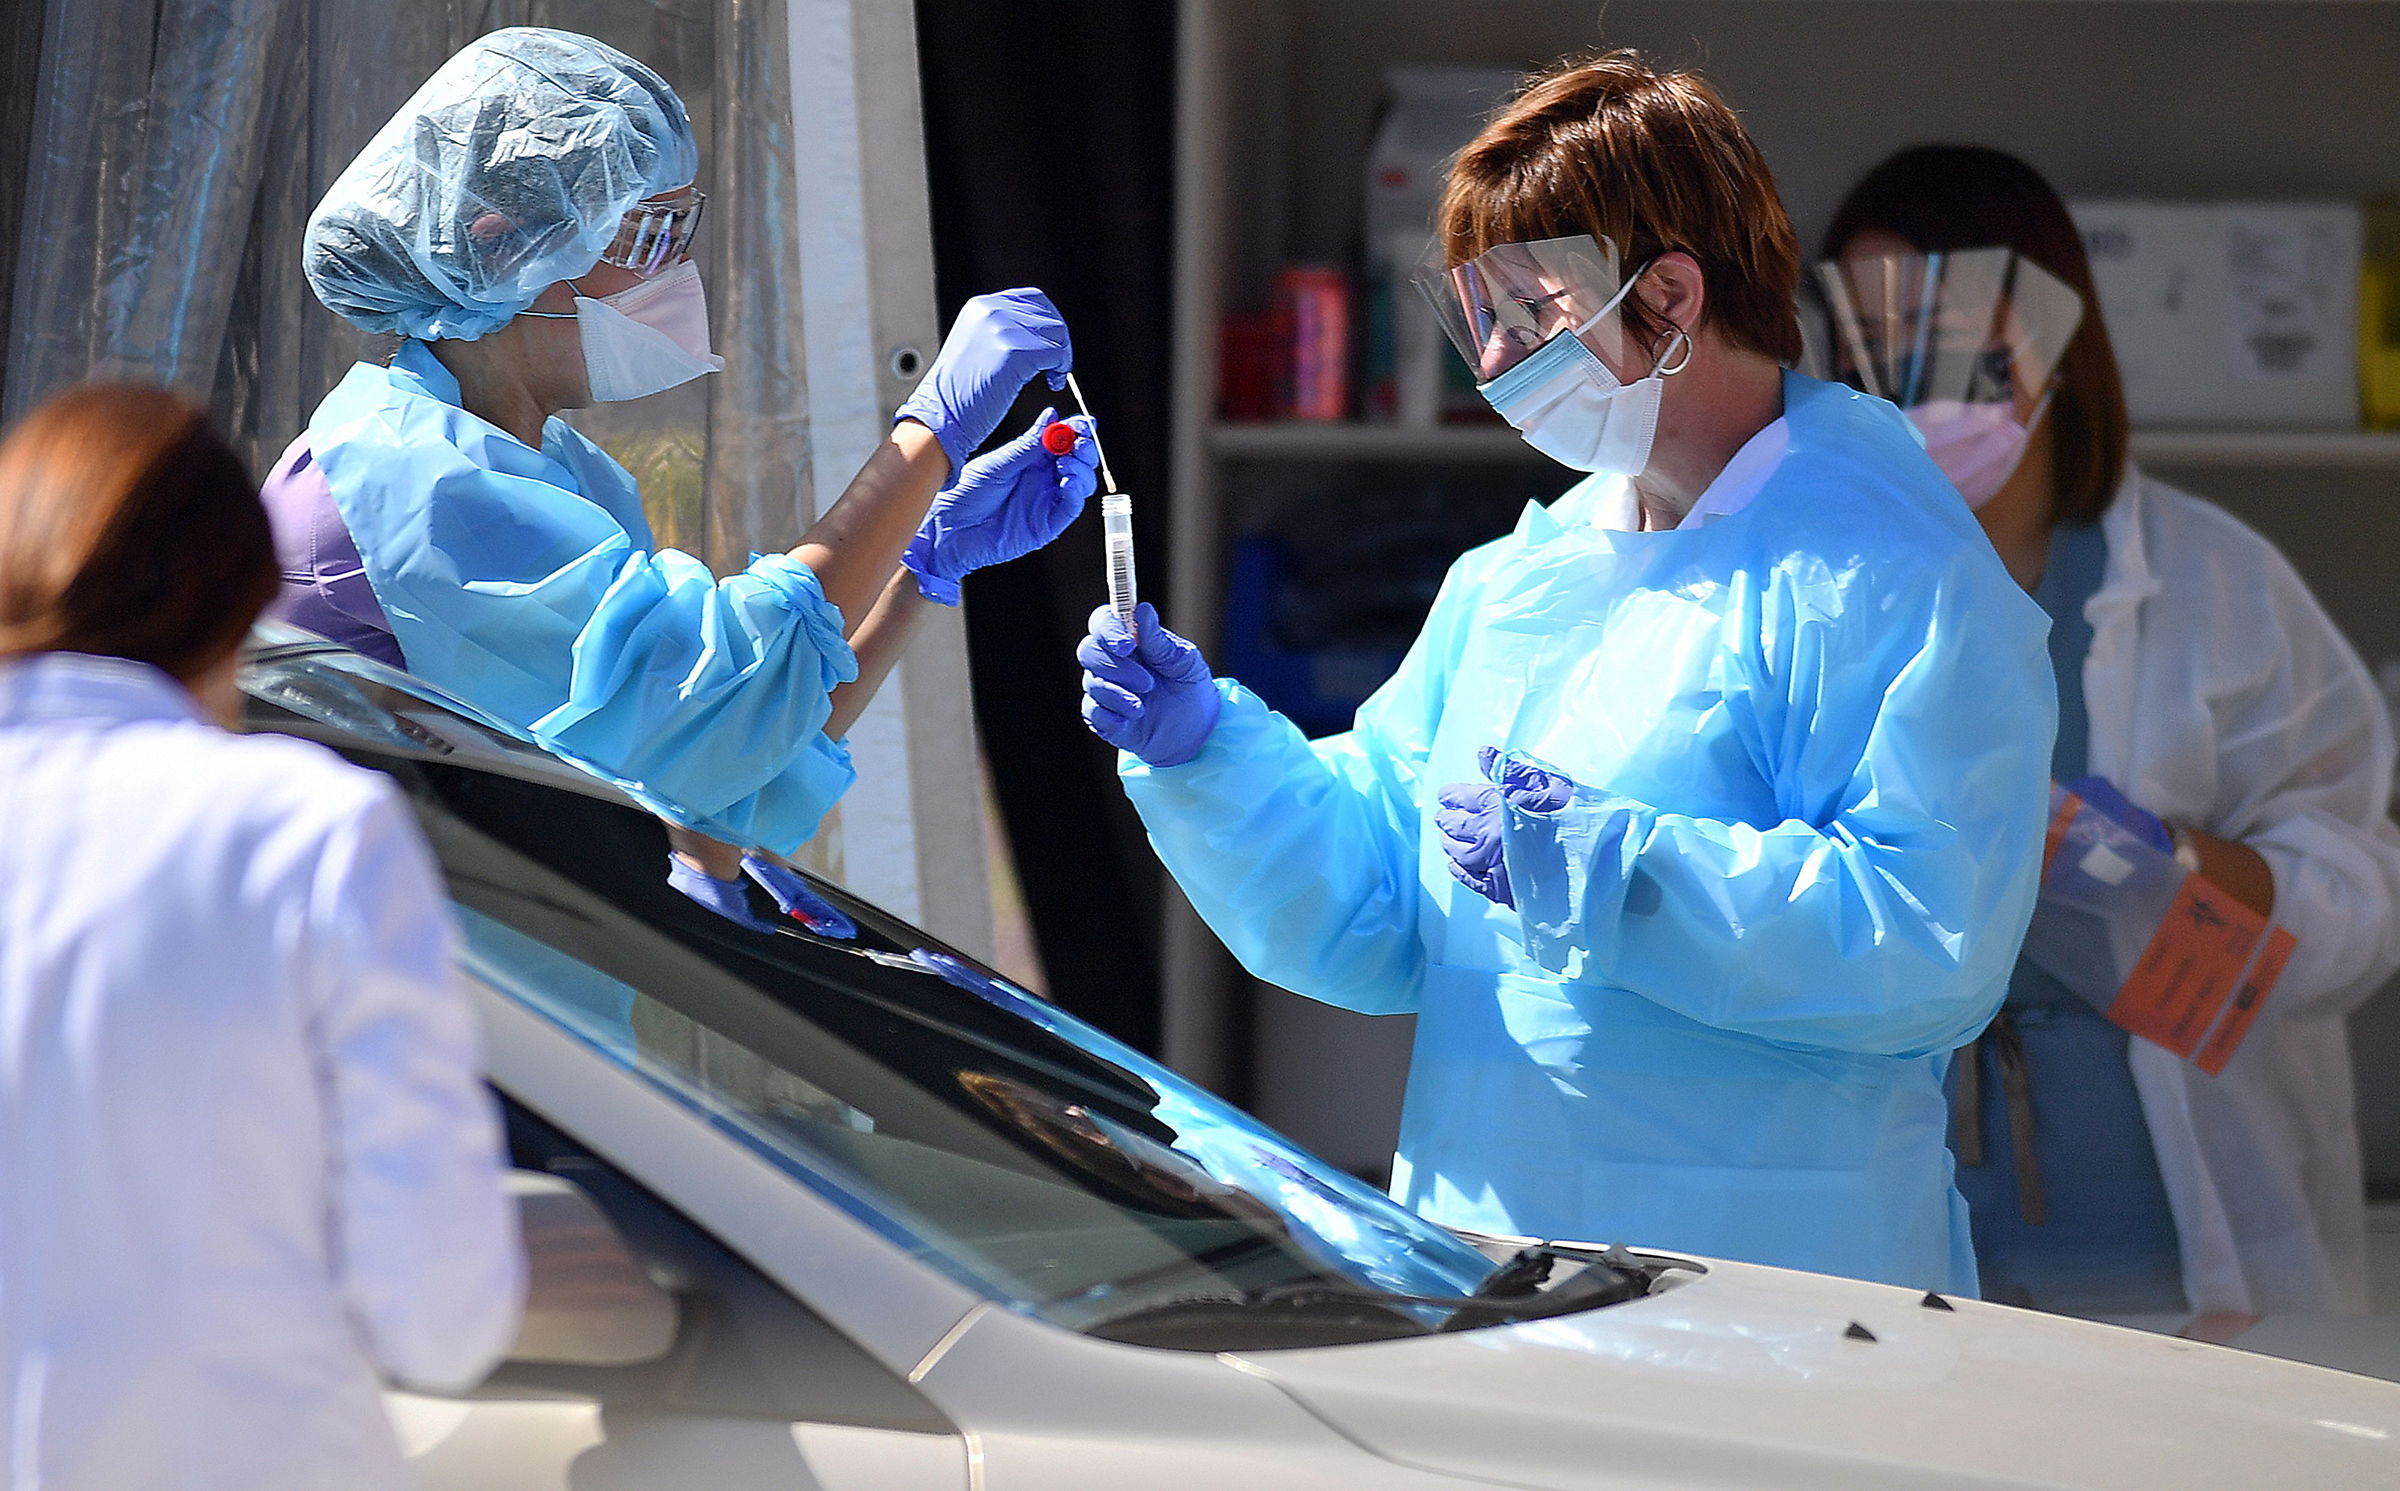 Medical workers test a patient for the novel coronavirus, COVID-19, at a drive-thru testing facility in San Francisco, California on March 12, 2020. (Josh Edelson—AFP via Getty Images)